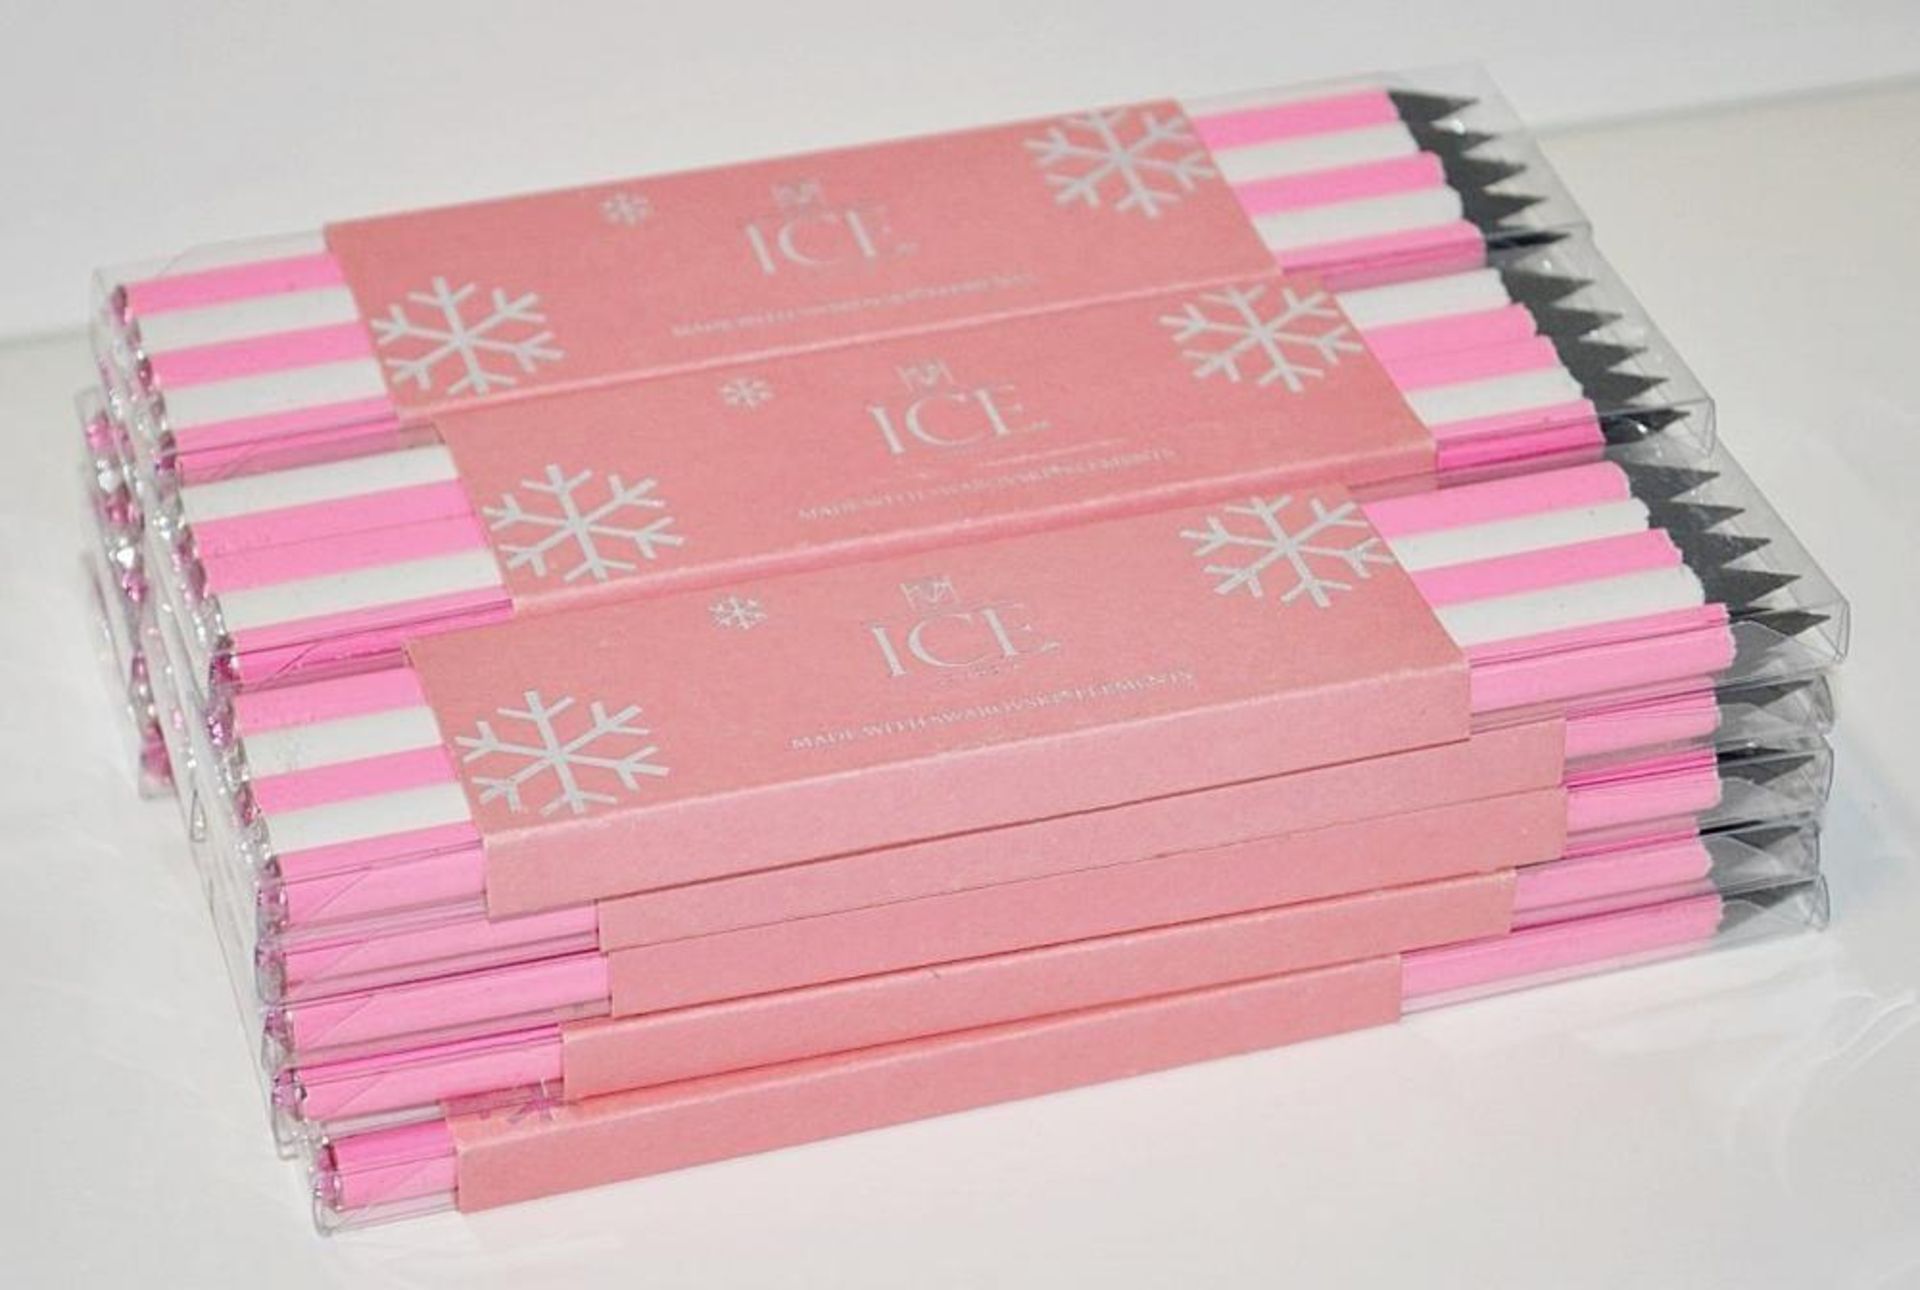 50 x ICE London Christmas Pencil Sets - Colour: PINK - Made With SWAROVSKI® ELEMENTS - Each Set - Image 2 of 4